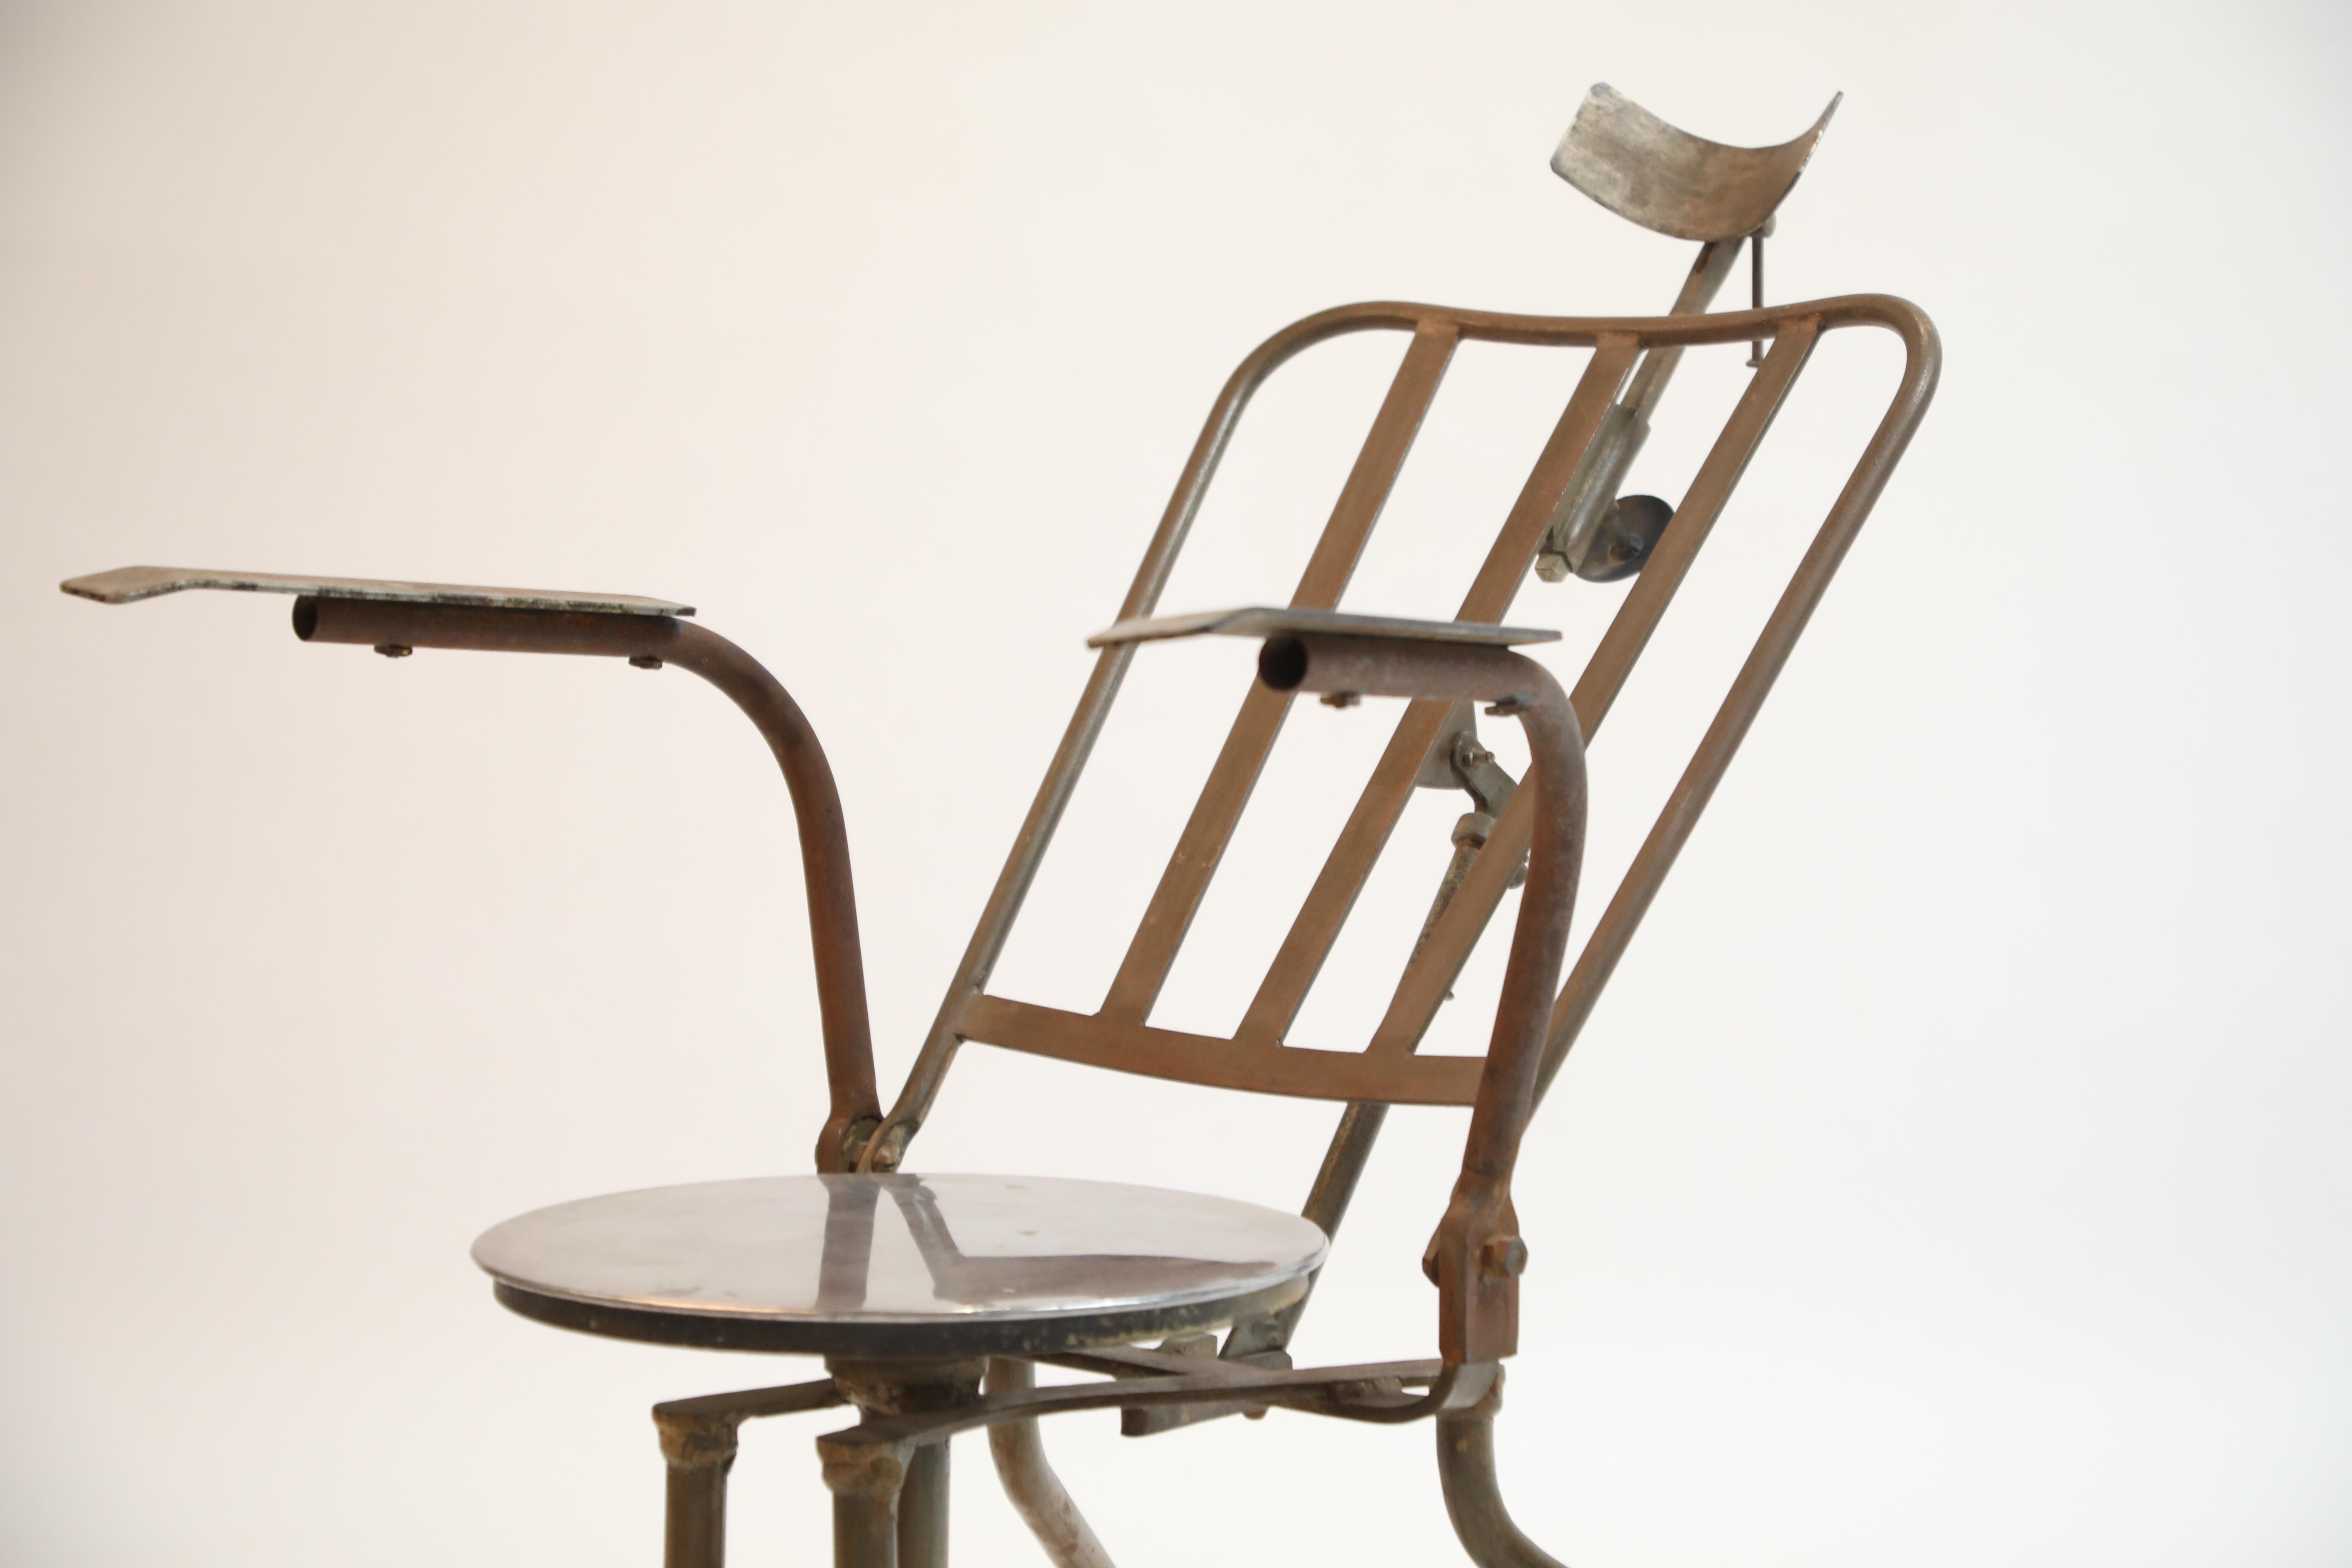 Industrial Steel Dentist Chair or Sculpture from Brazil, circa 1900s (Metall)